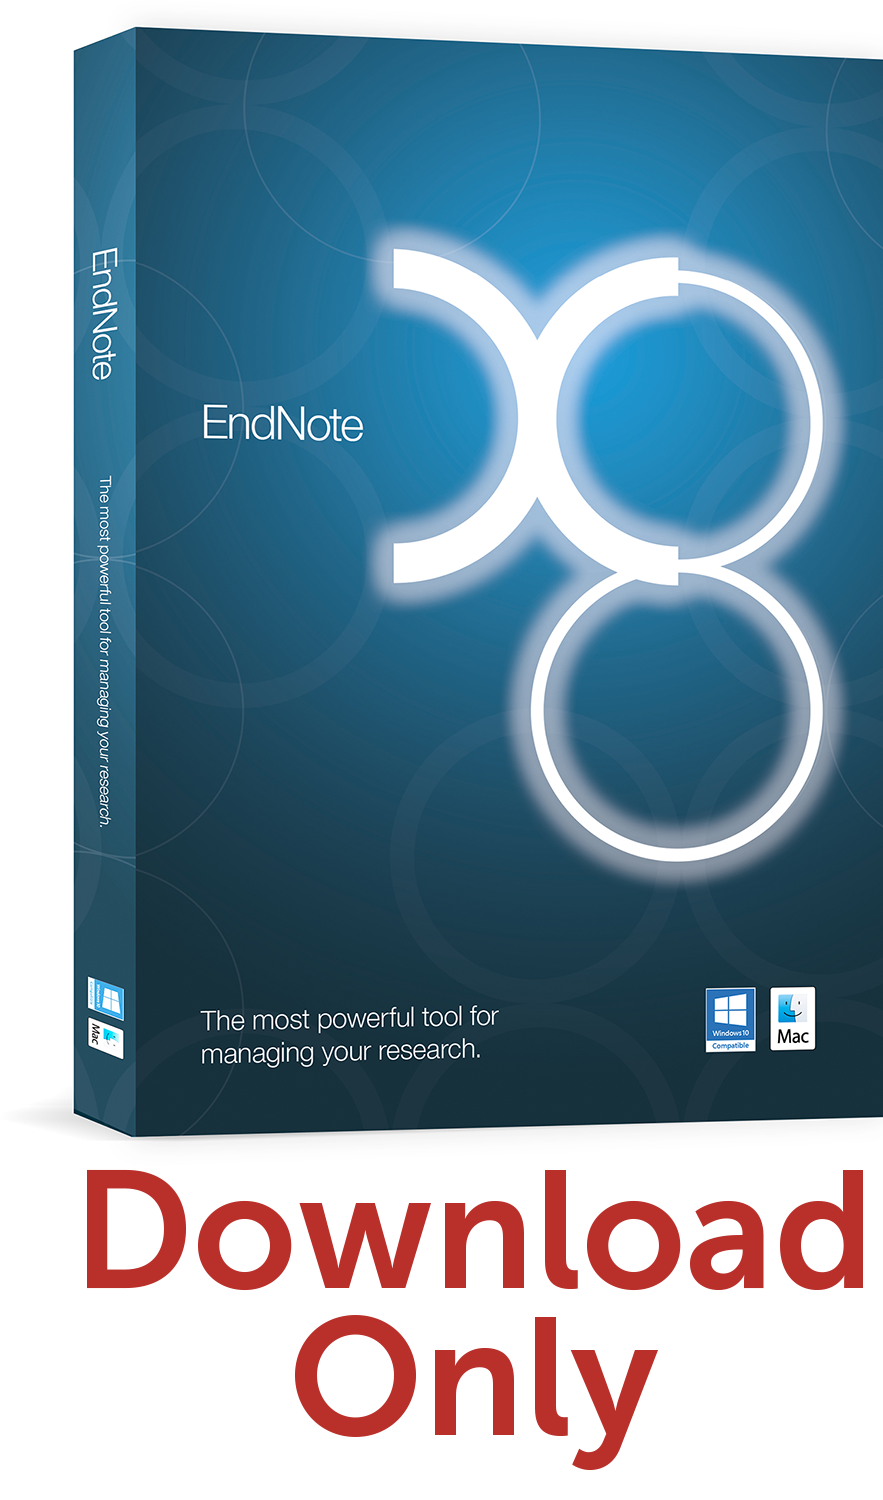 download endnote free for window 8